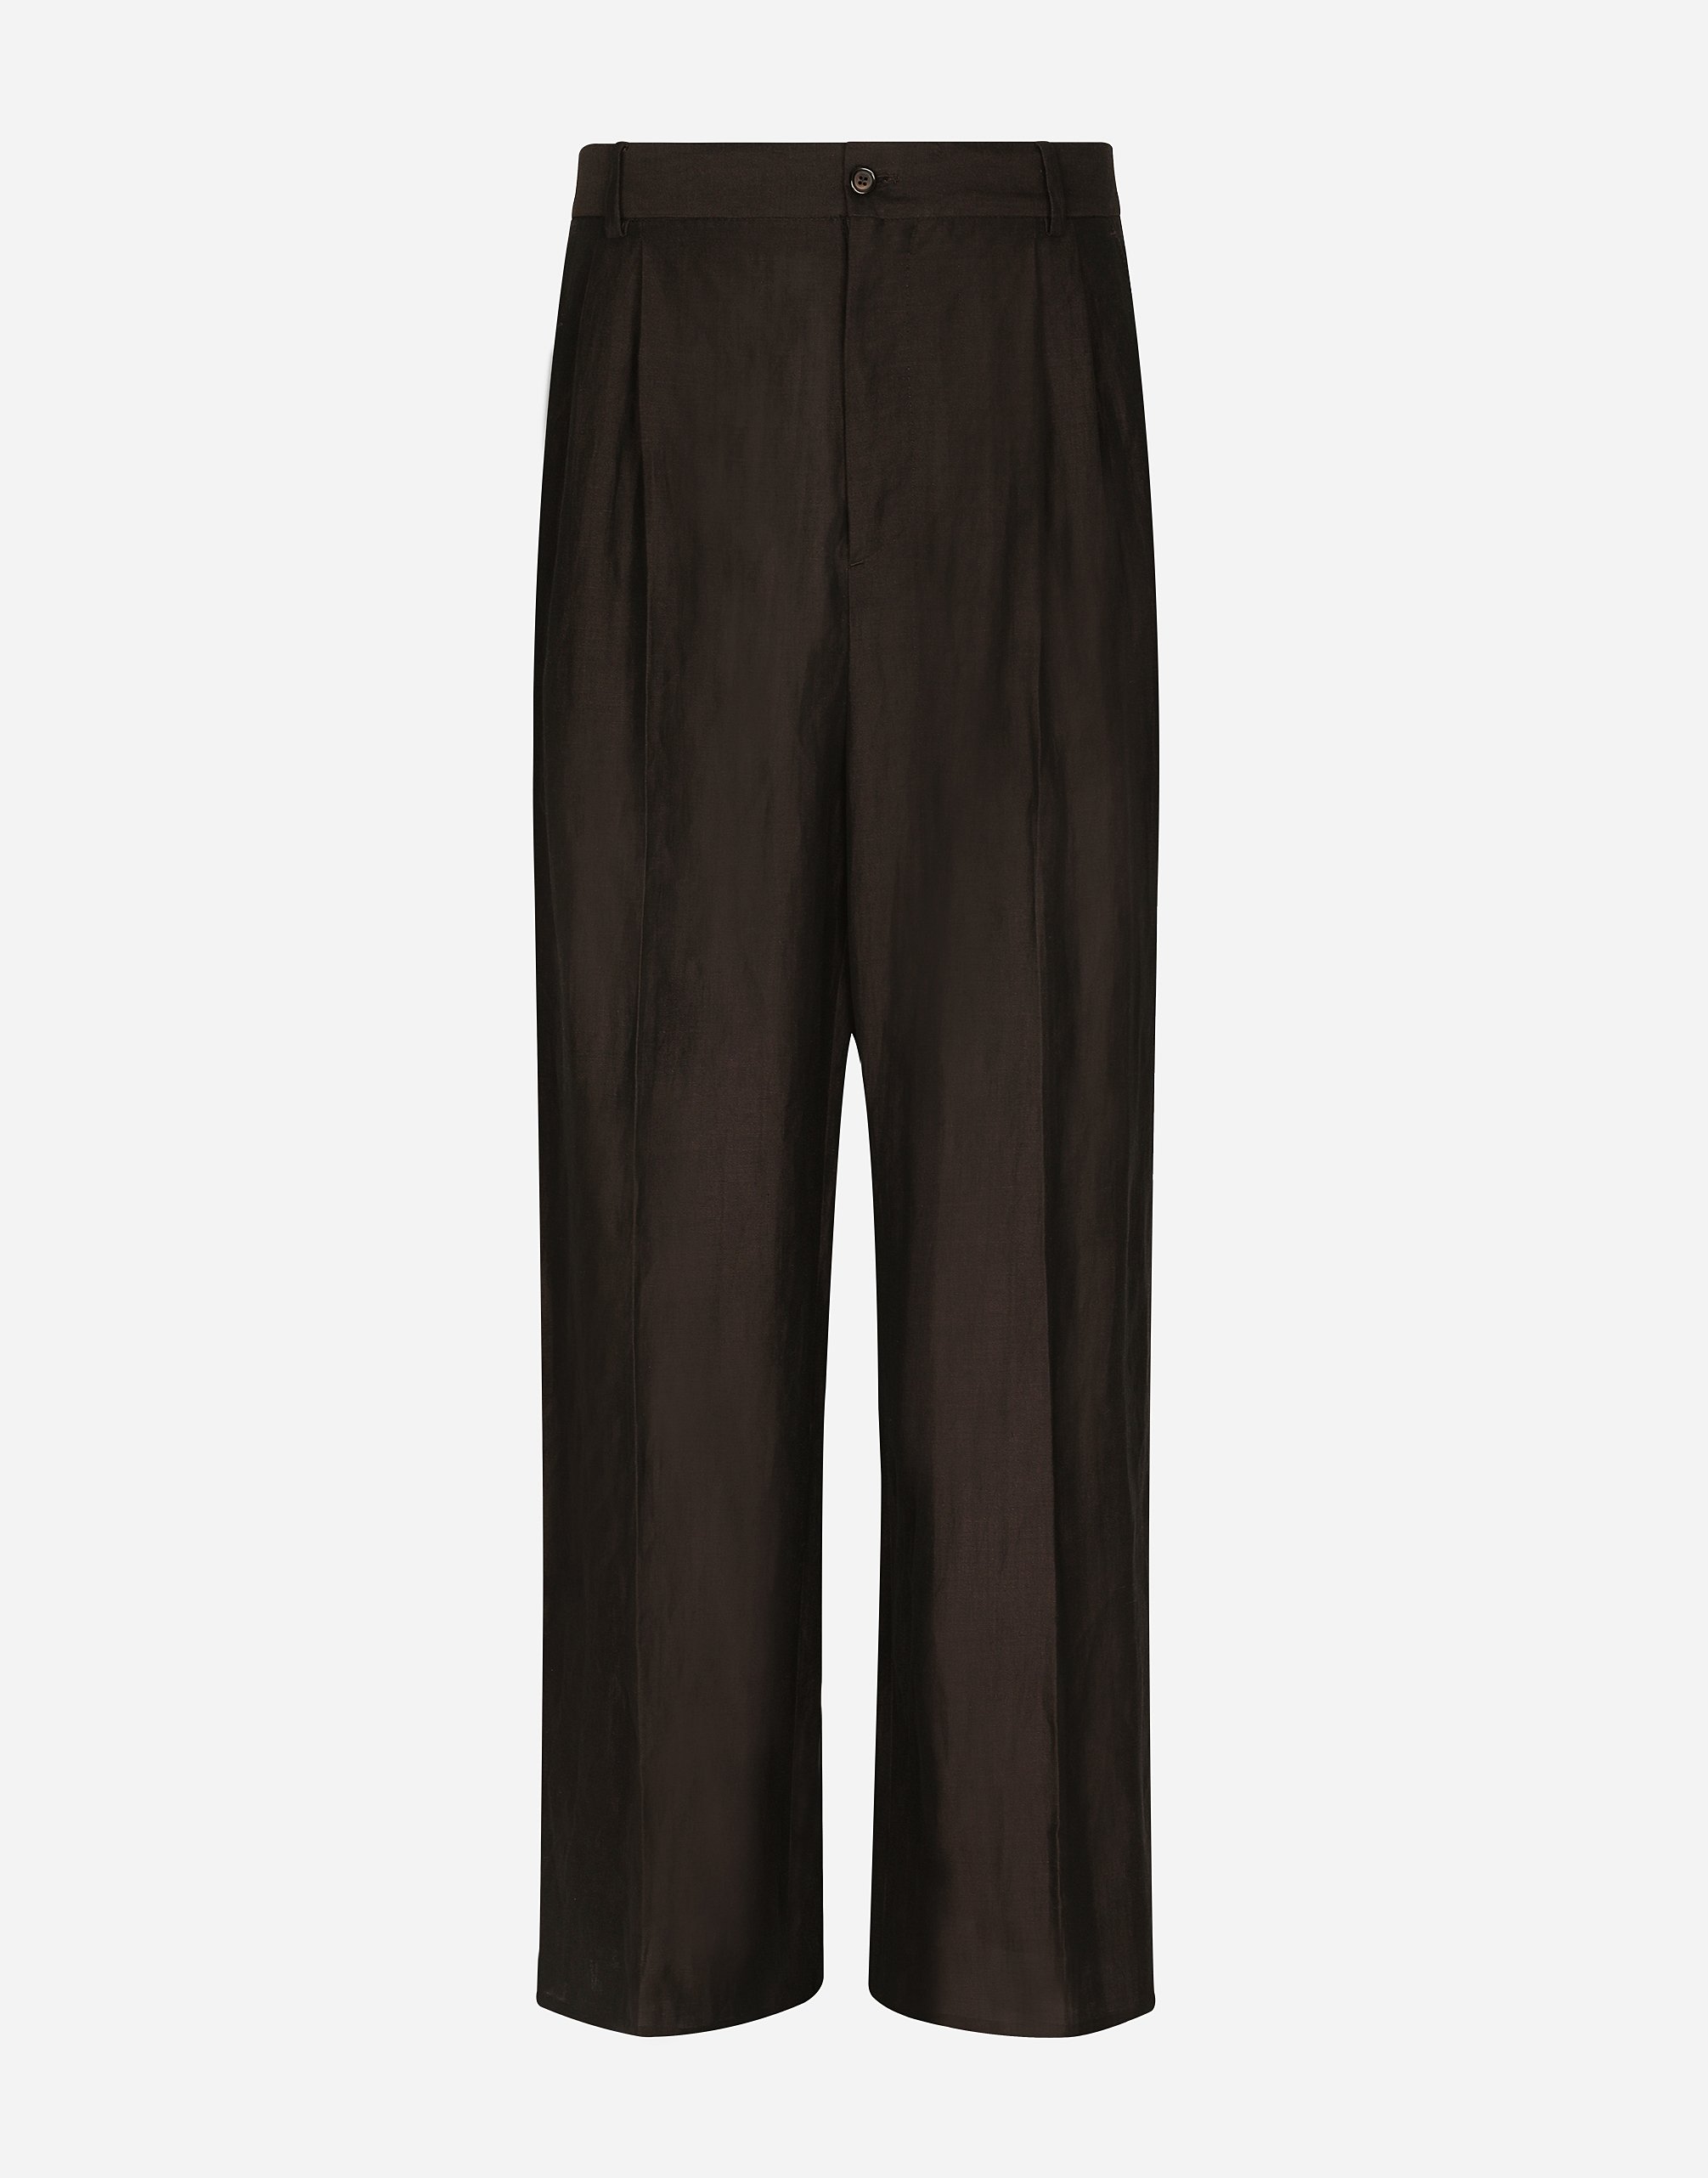 Dolce & Gabbana Tailored Viscose And Linen Pants In Brown